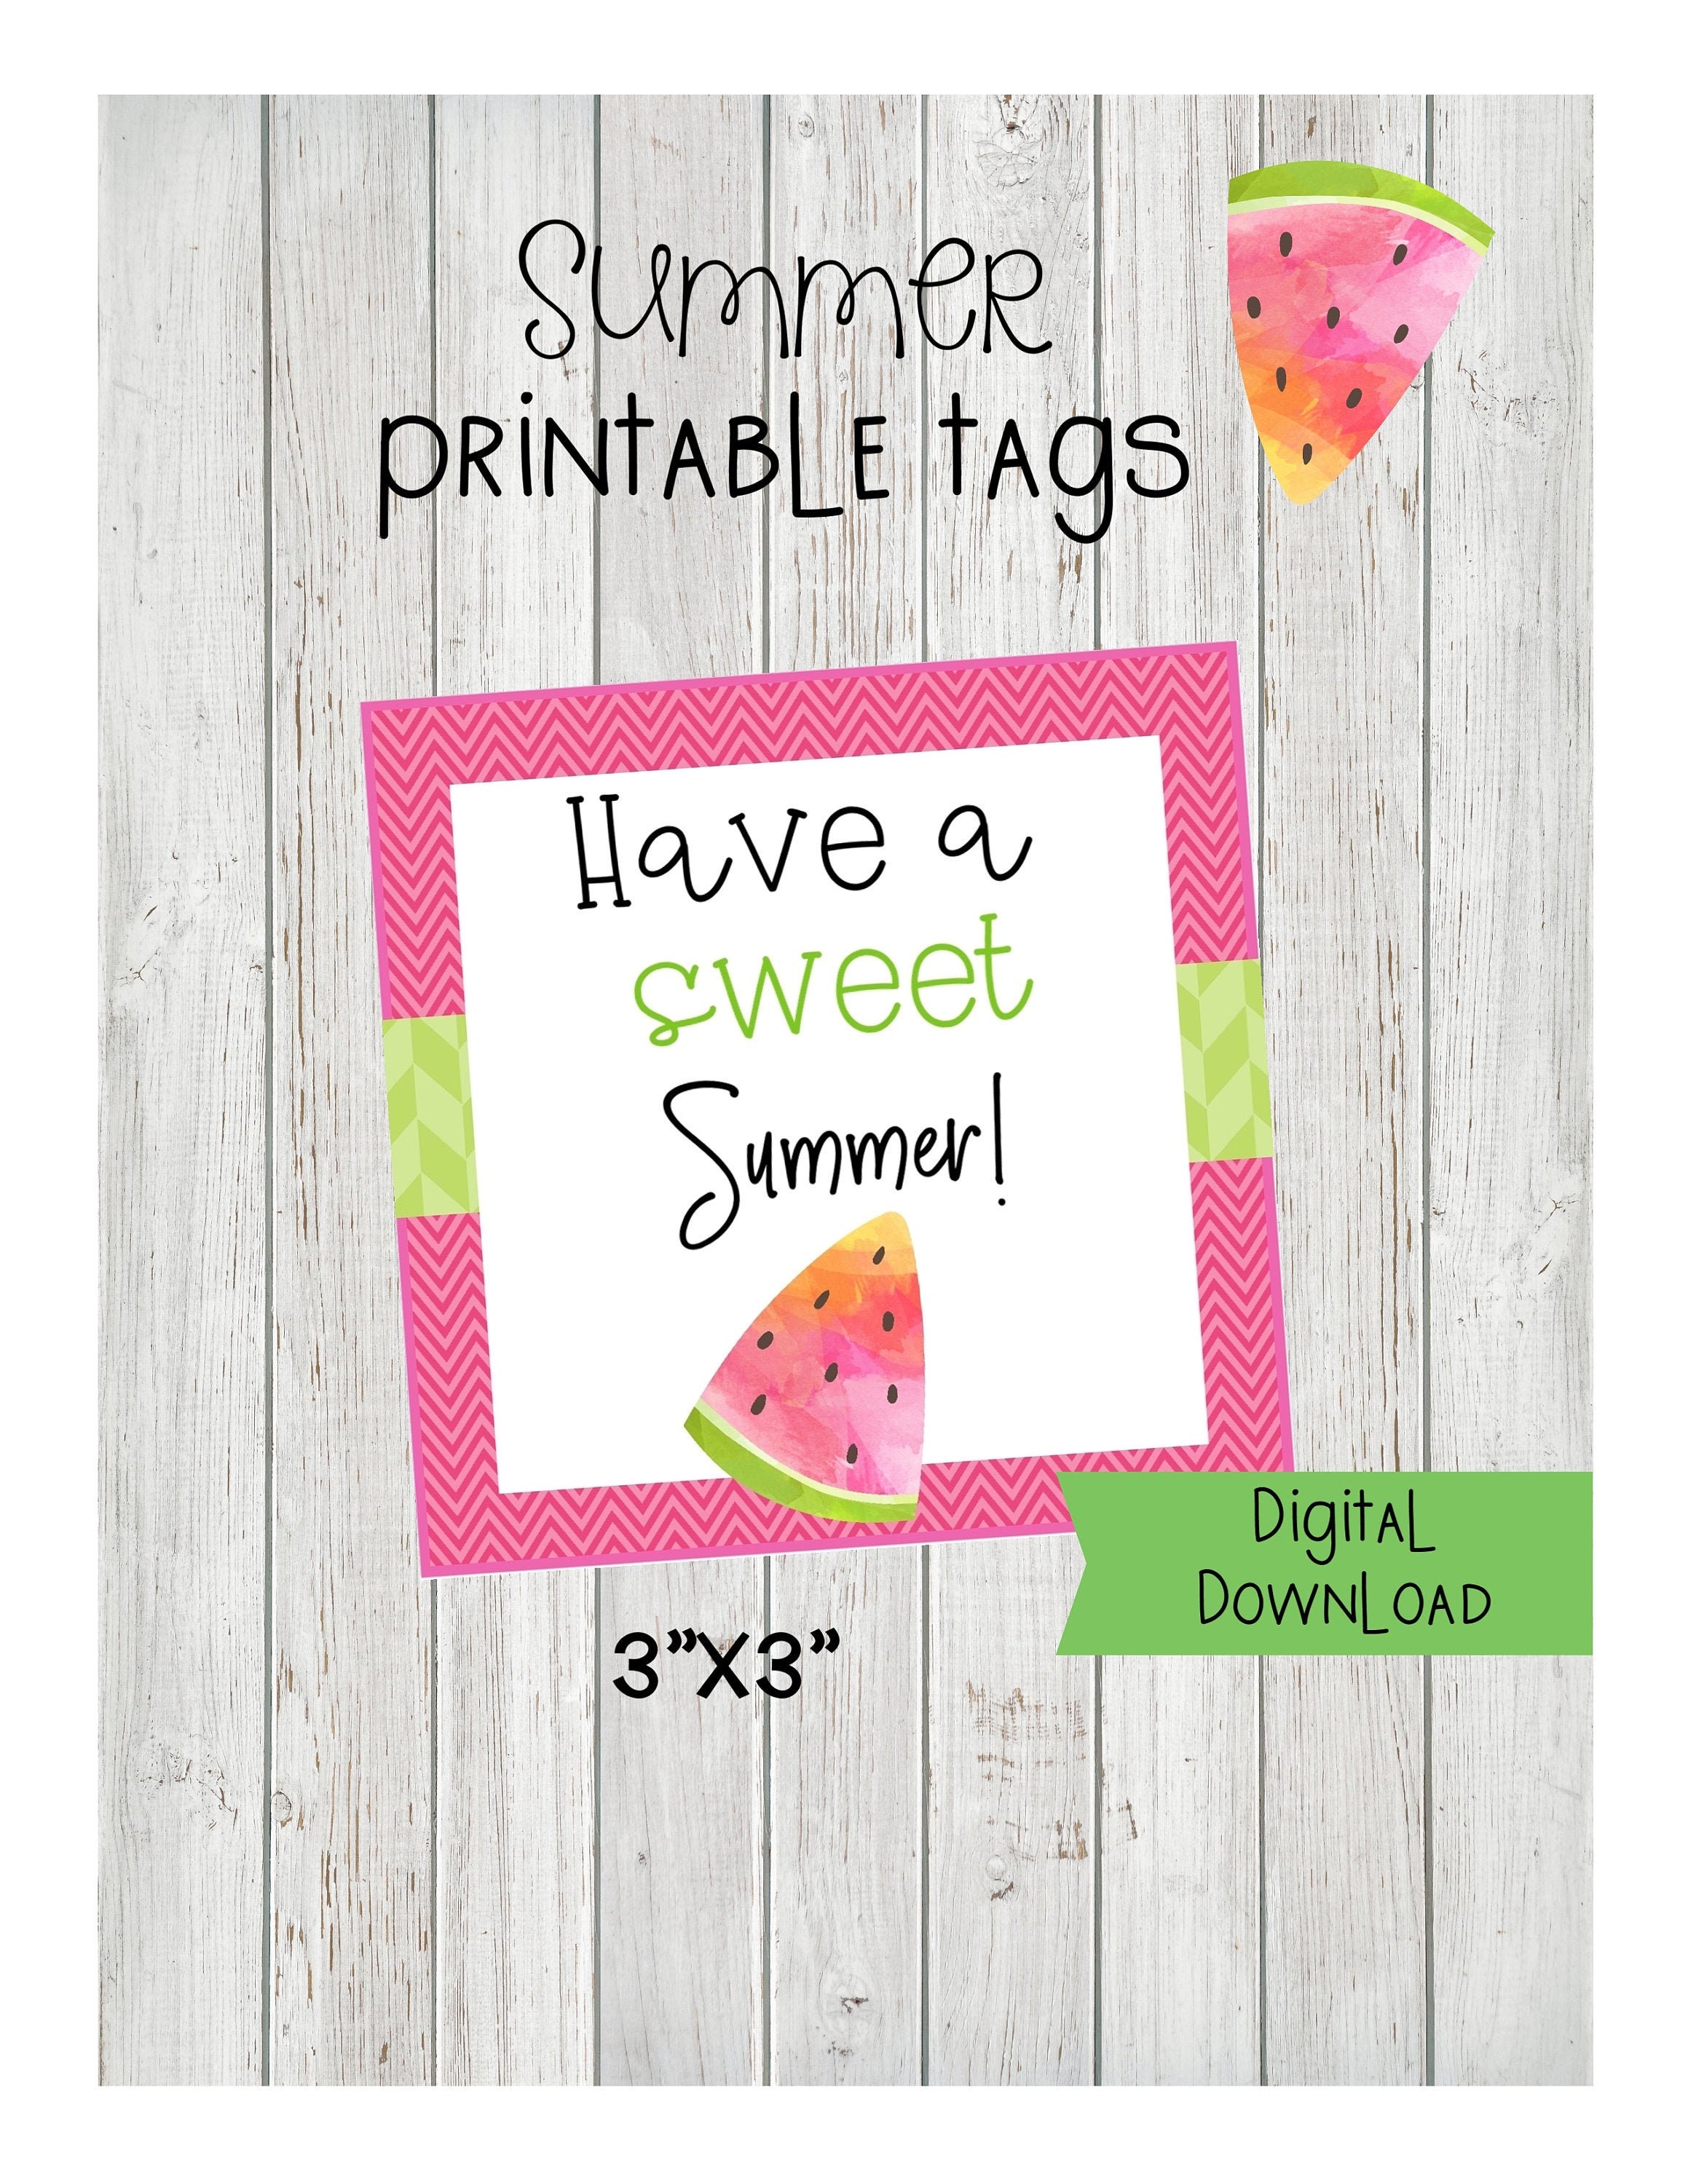 Watermelon gift tagsSummer tagsHave a Sweet Summer printable Etsy